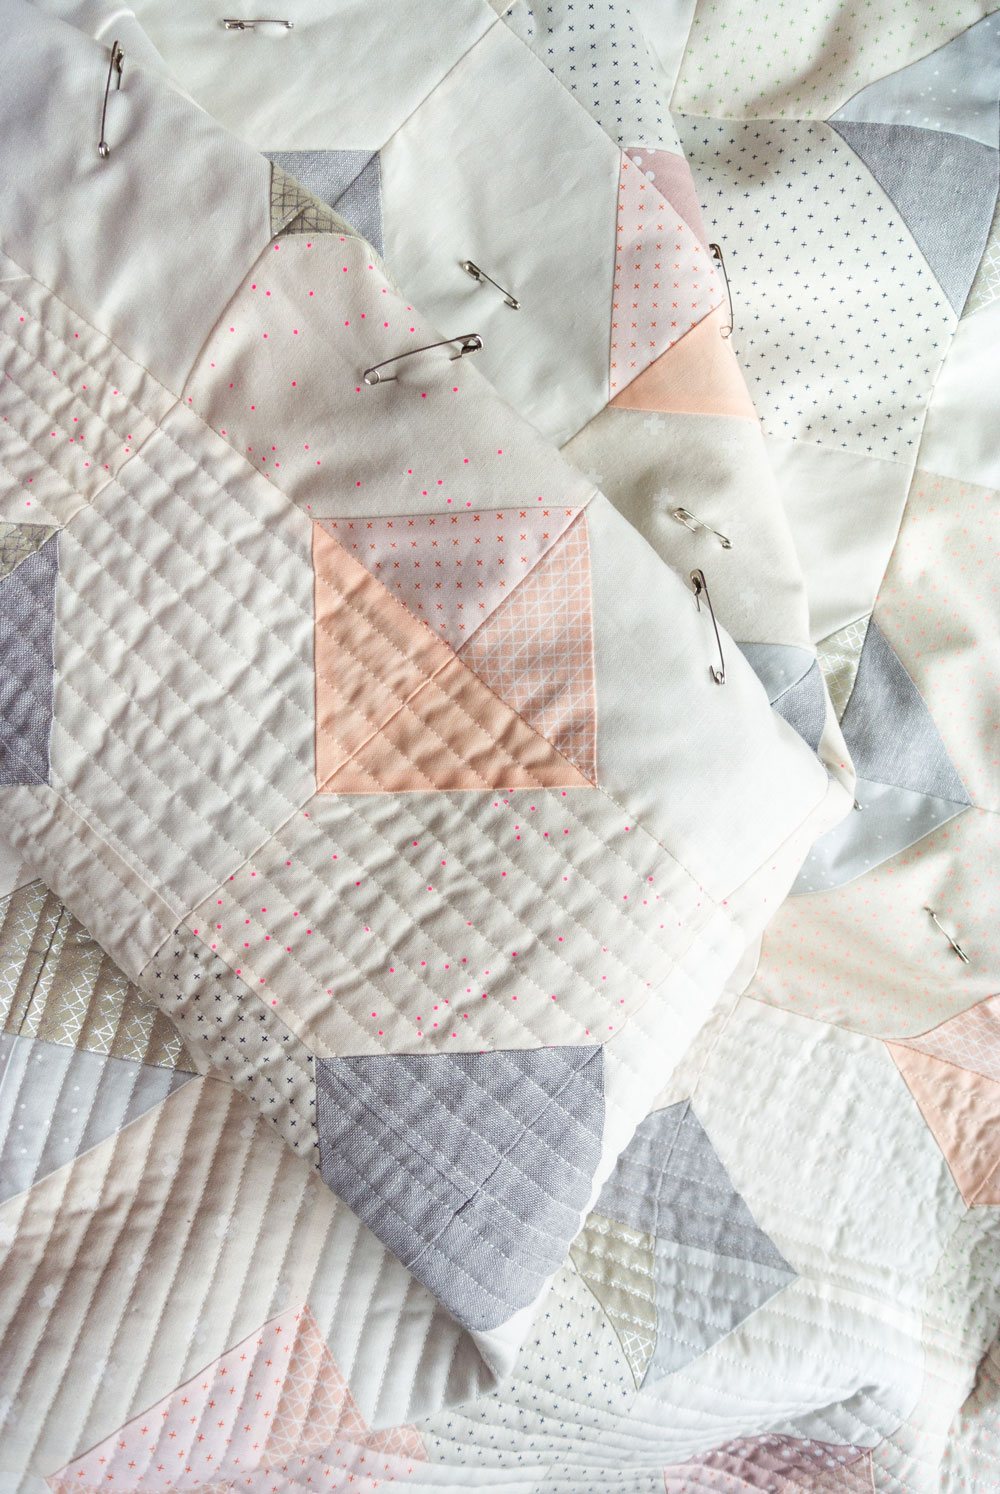 The Glitter & Glow quilt pattern comes in king, queen/full, twin, throw and baby quilt sizes. It's a simple beginner-friendly quilt pattern that is also scrap and fat quarter friendly!